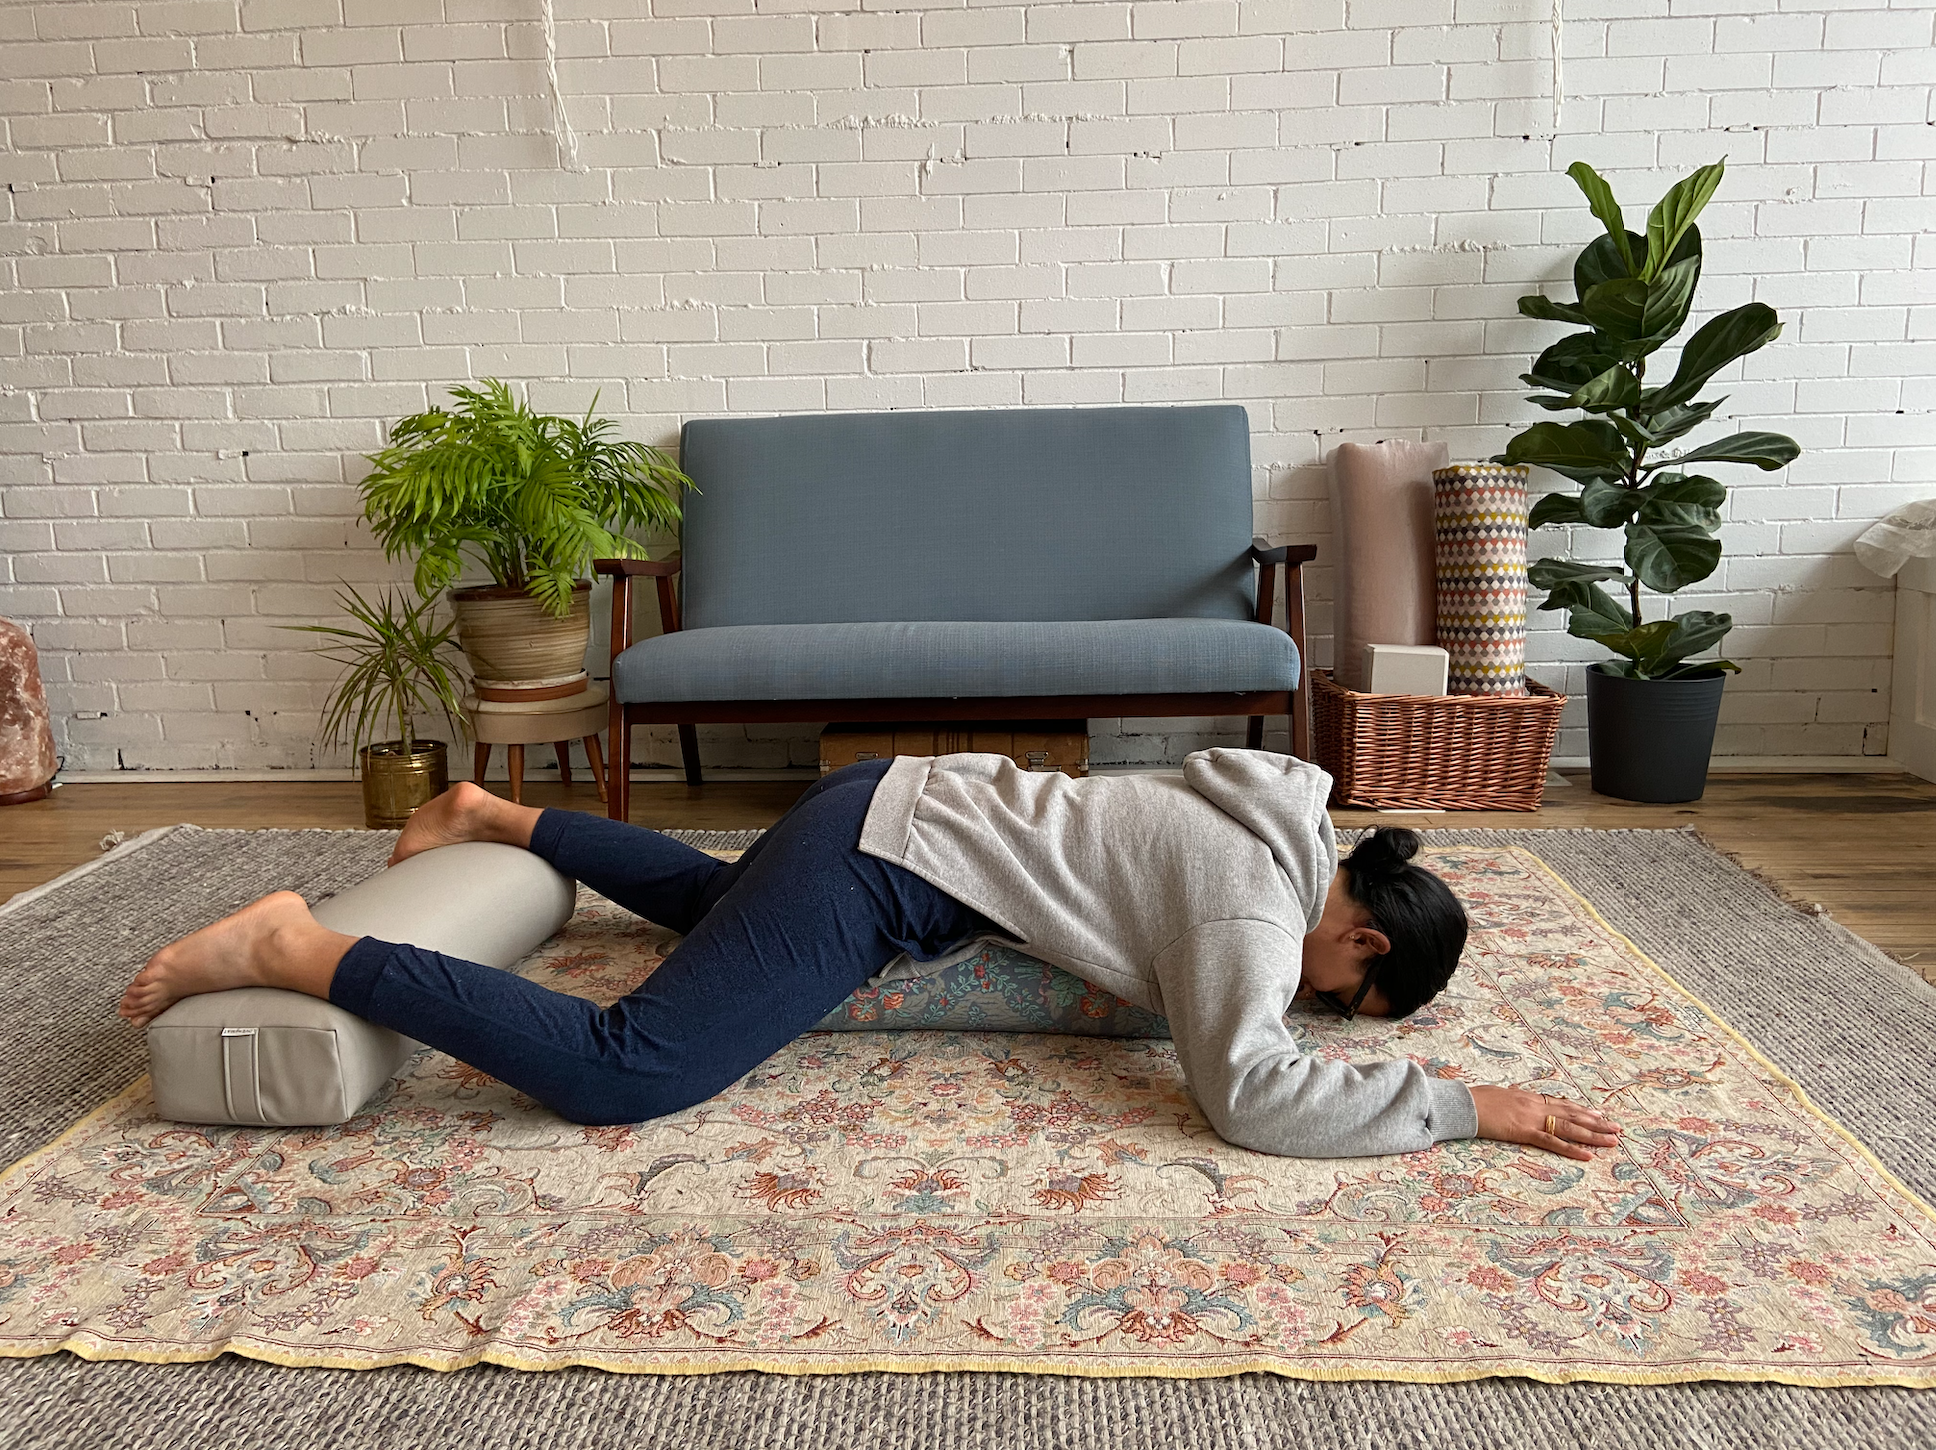 At Home Yoga with Bolster